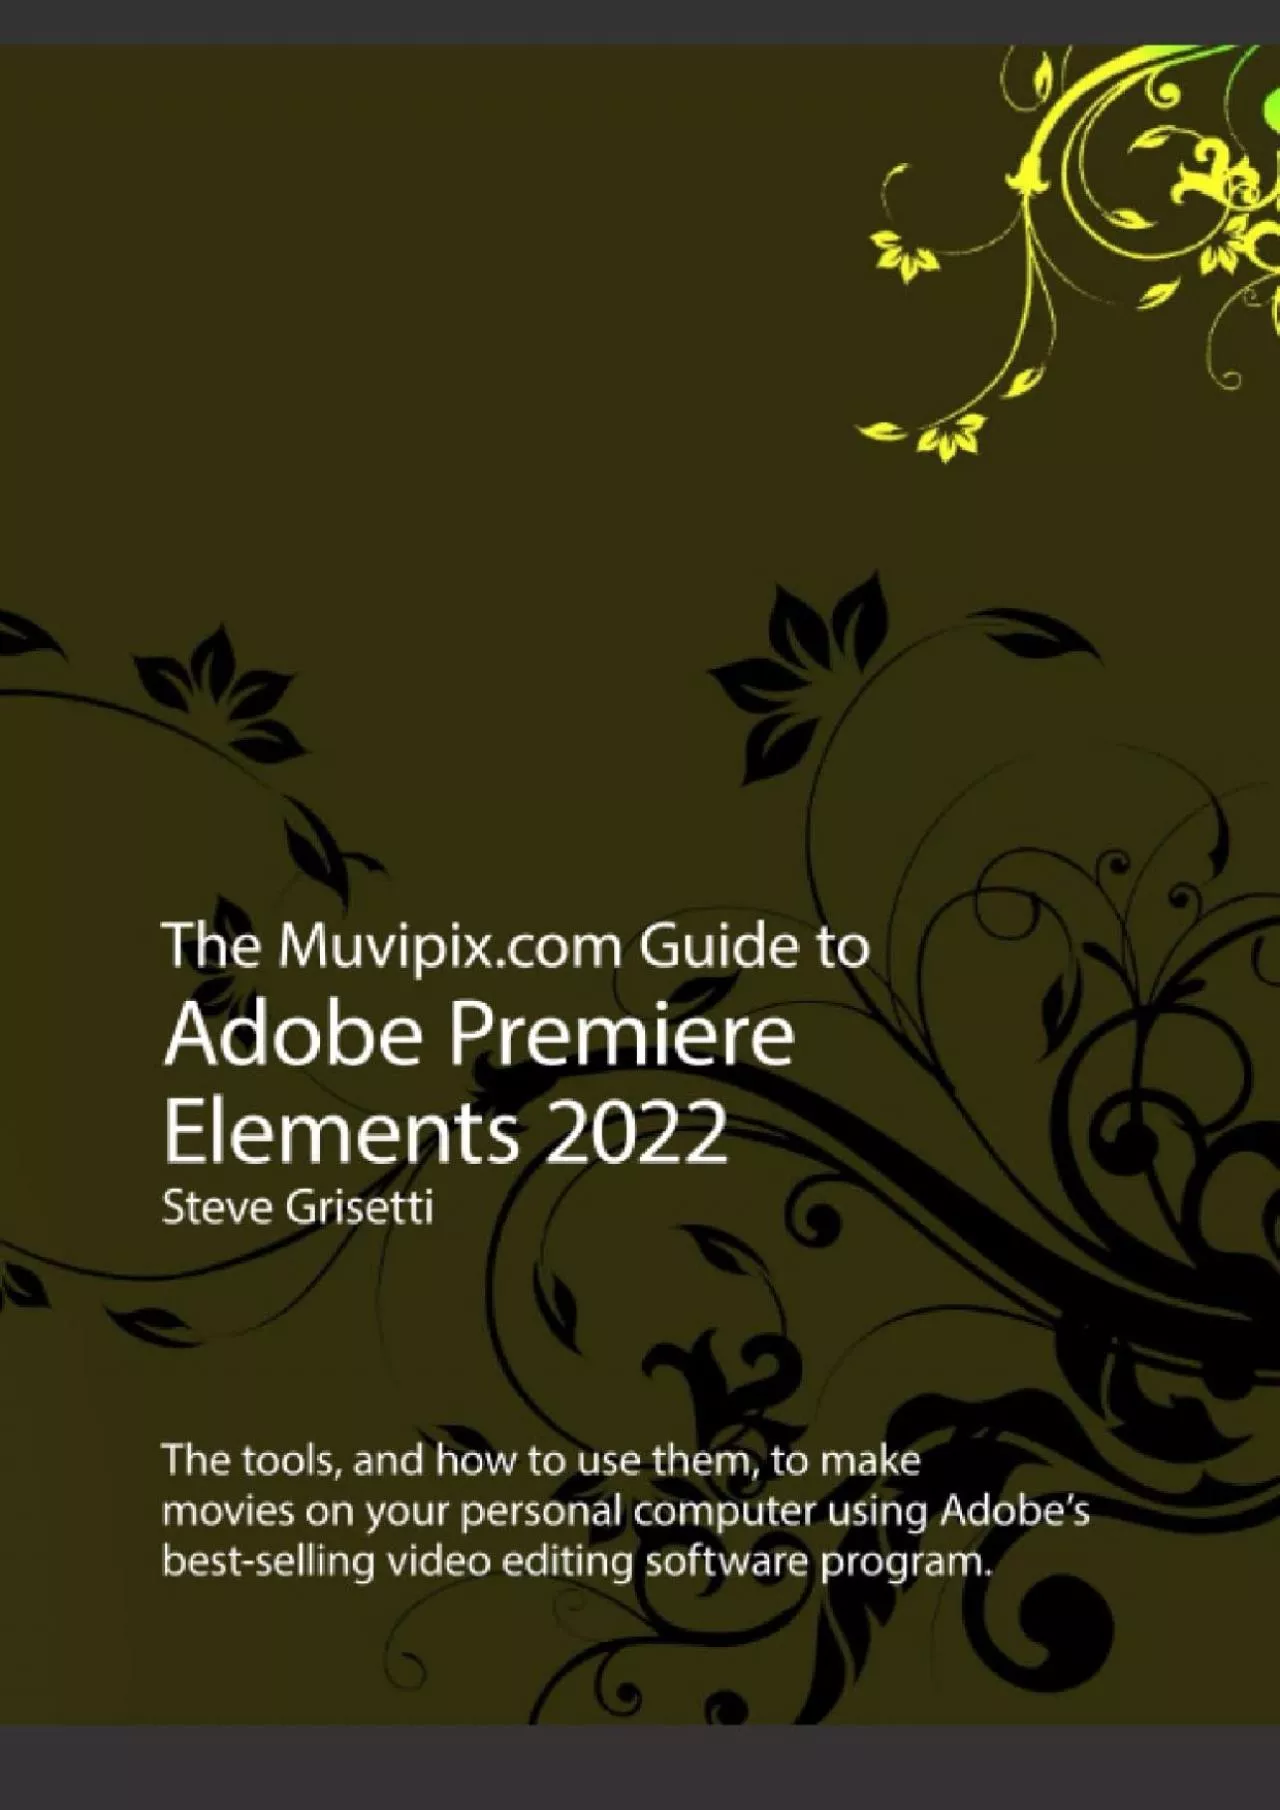 (BOOK)-The Muvipix.com Guide to Adobe Premiere Elements 2022: The tools and how to use